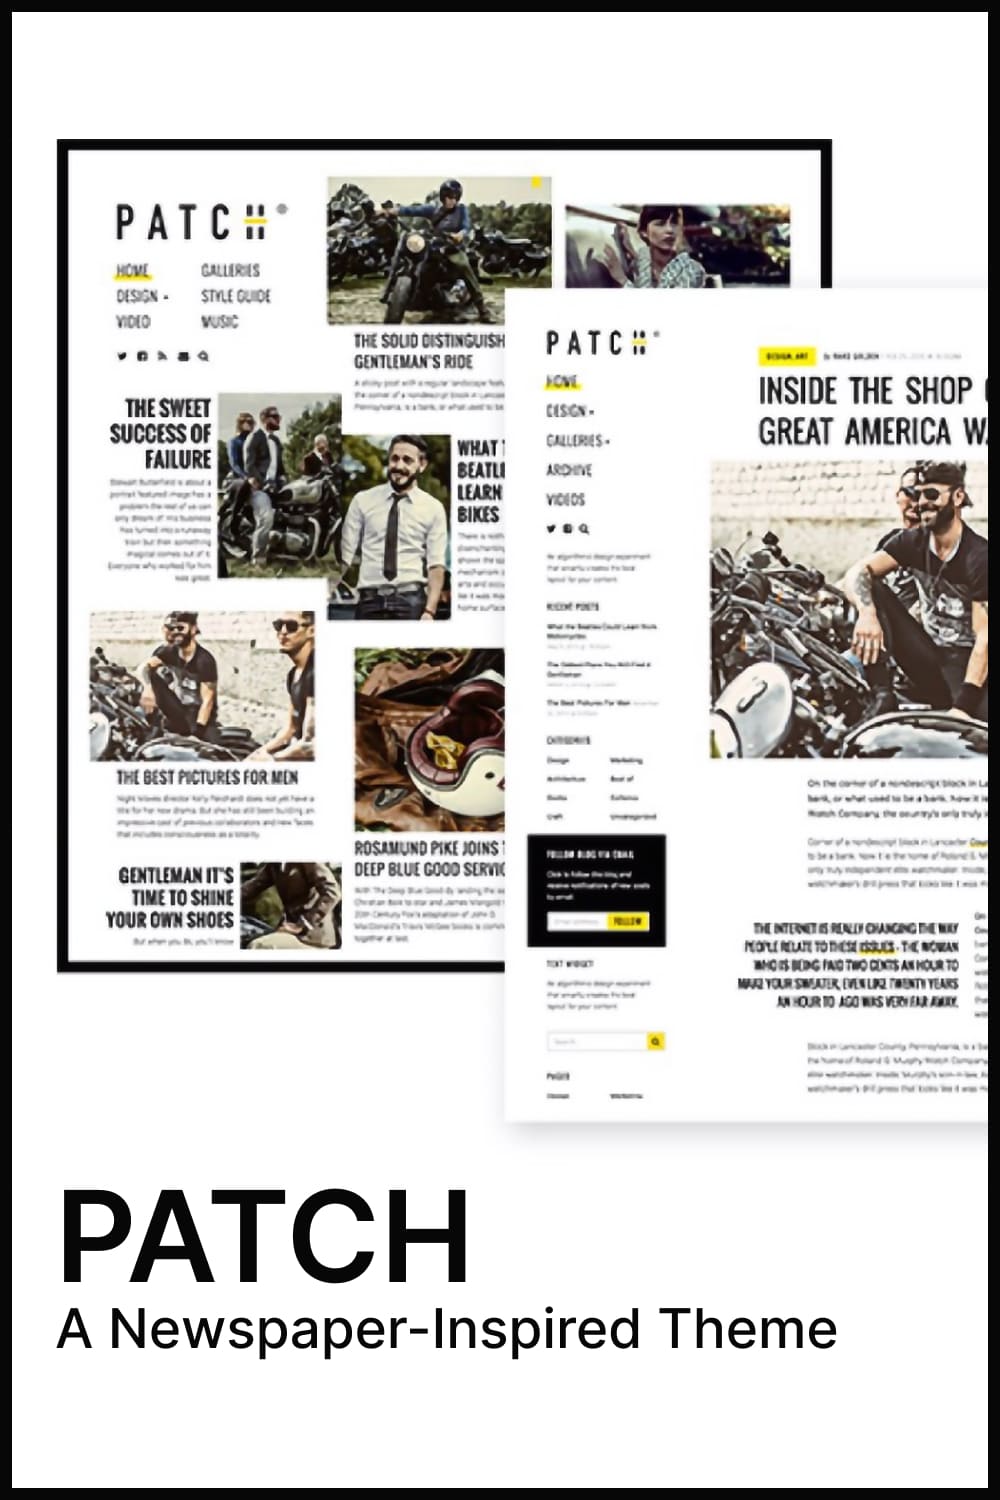 Patch a Newspaper - Inspired Theme, picture for pinterest 1000x1500.